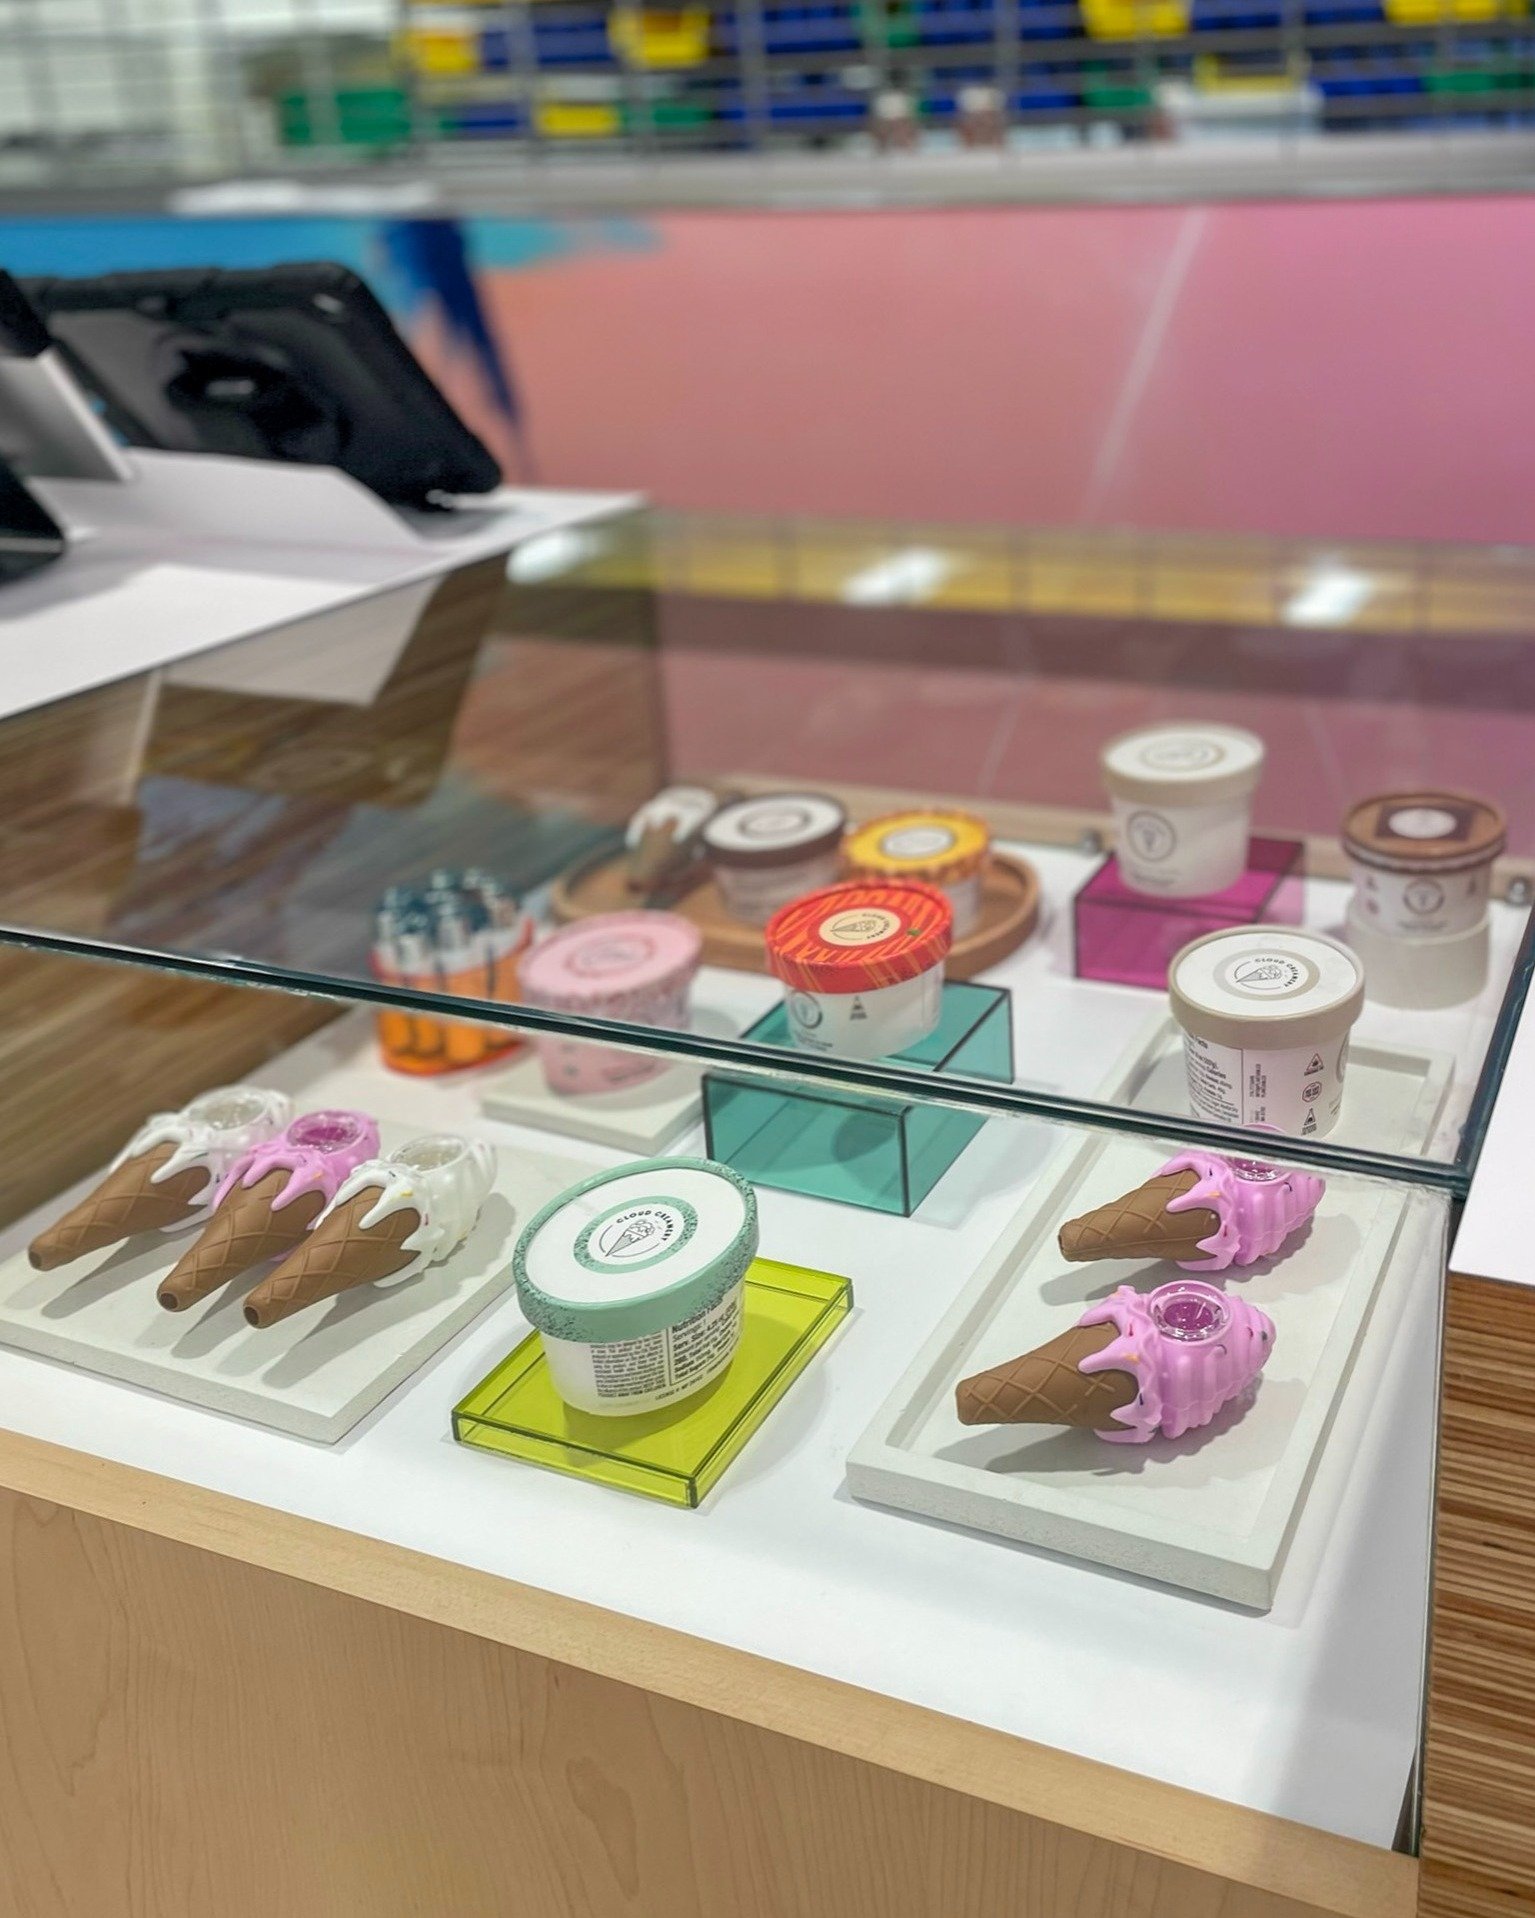 In collaboration with Gabby Rosi, ZenGenius designed a customer journey within The Goods dispensary with clear signage, organized layouts, and sensory experiences. 

With product education, informative labeling, and knowledgeable staff, customers can